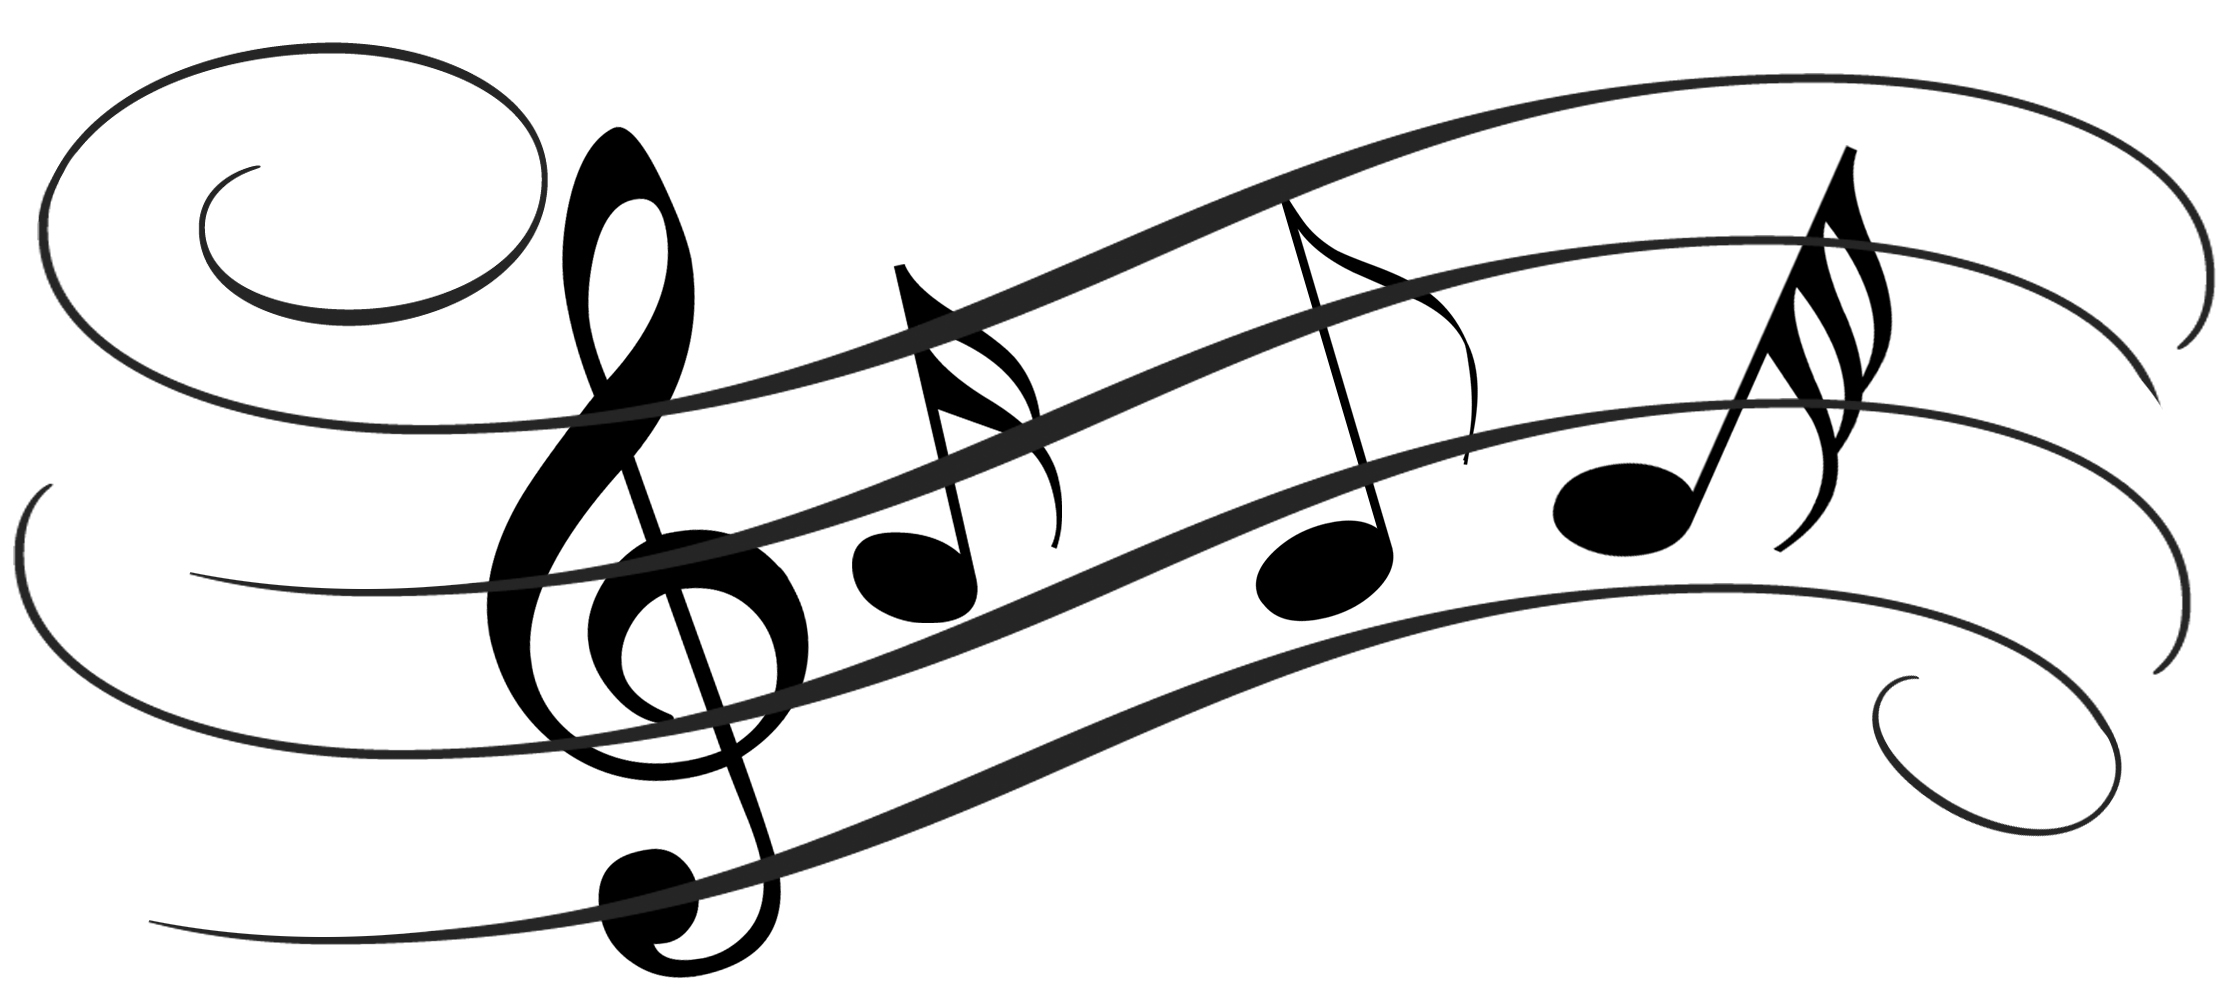 music notes on staff clipart - Music Staff Clip Art